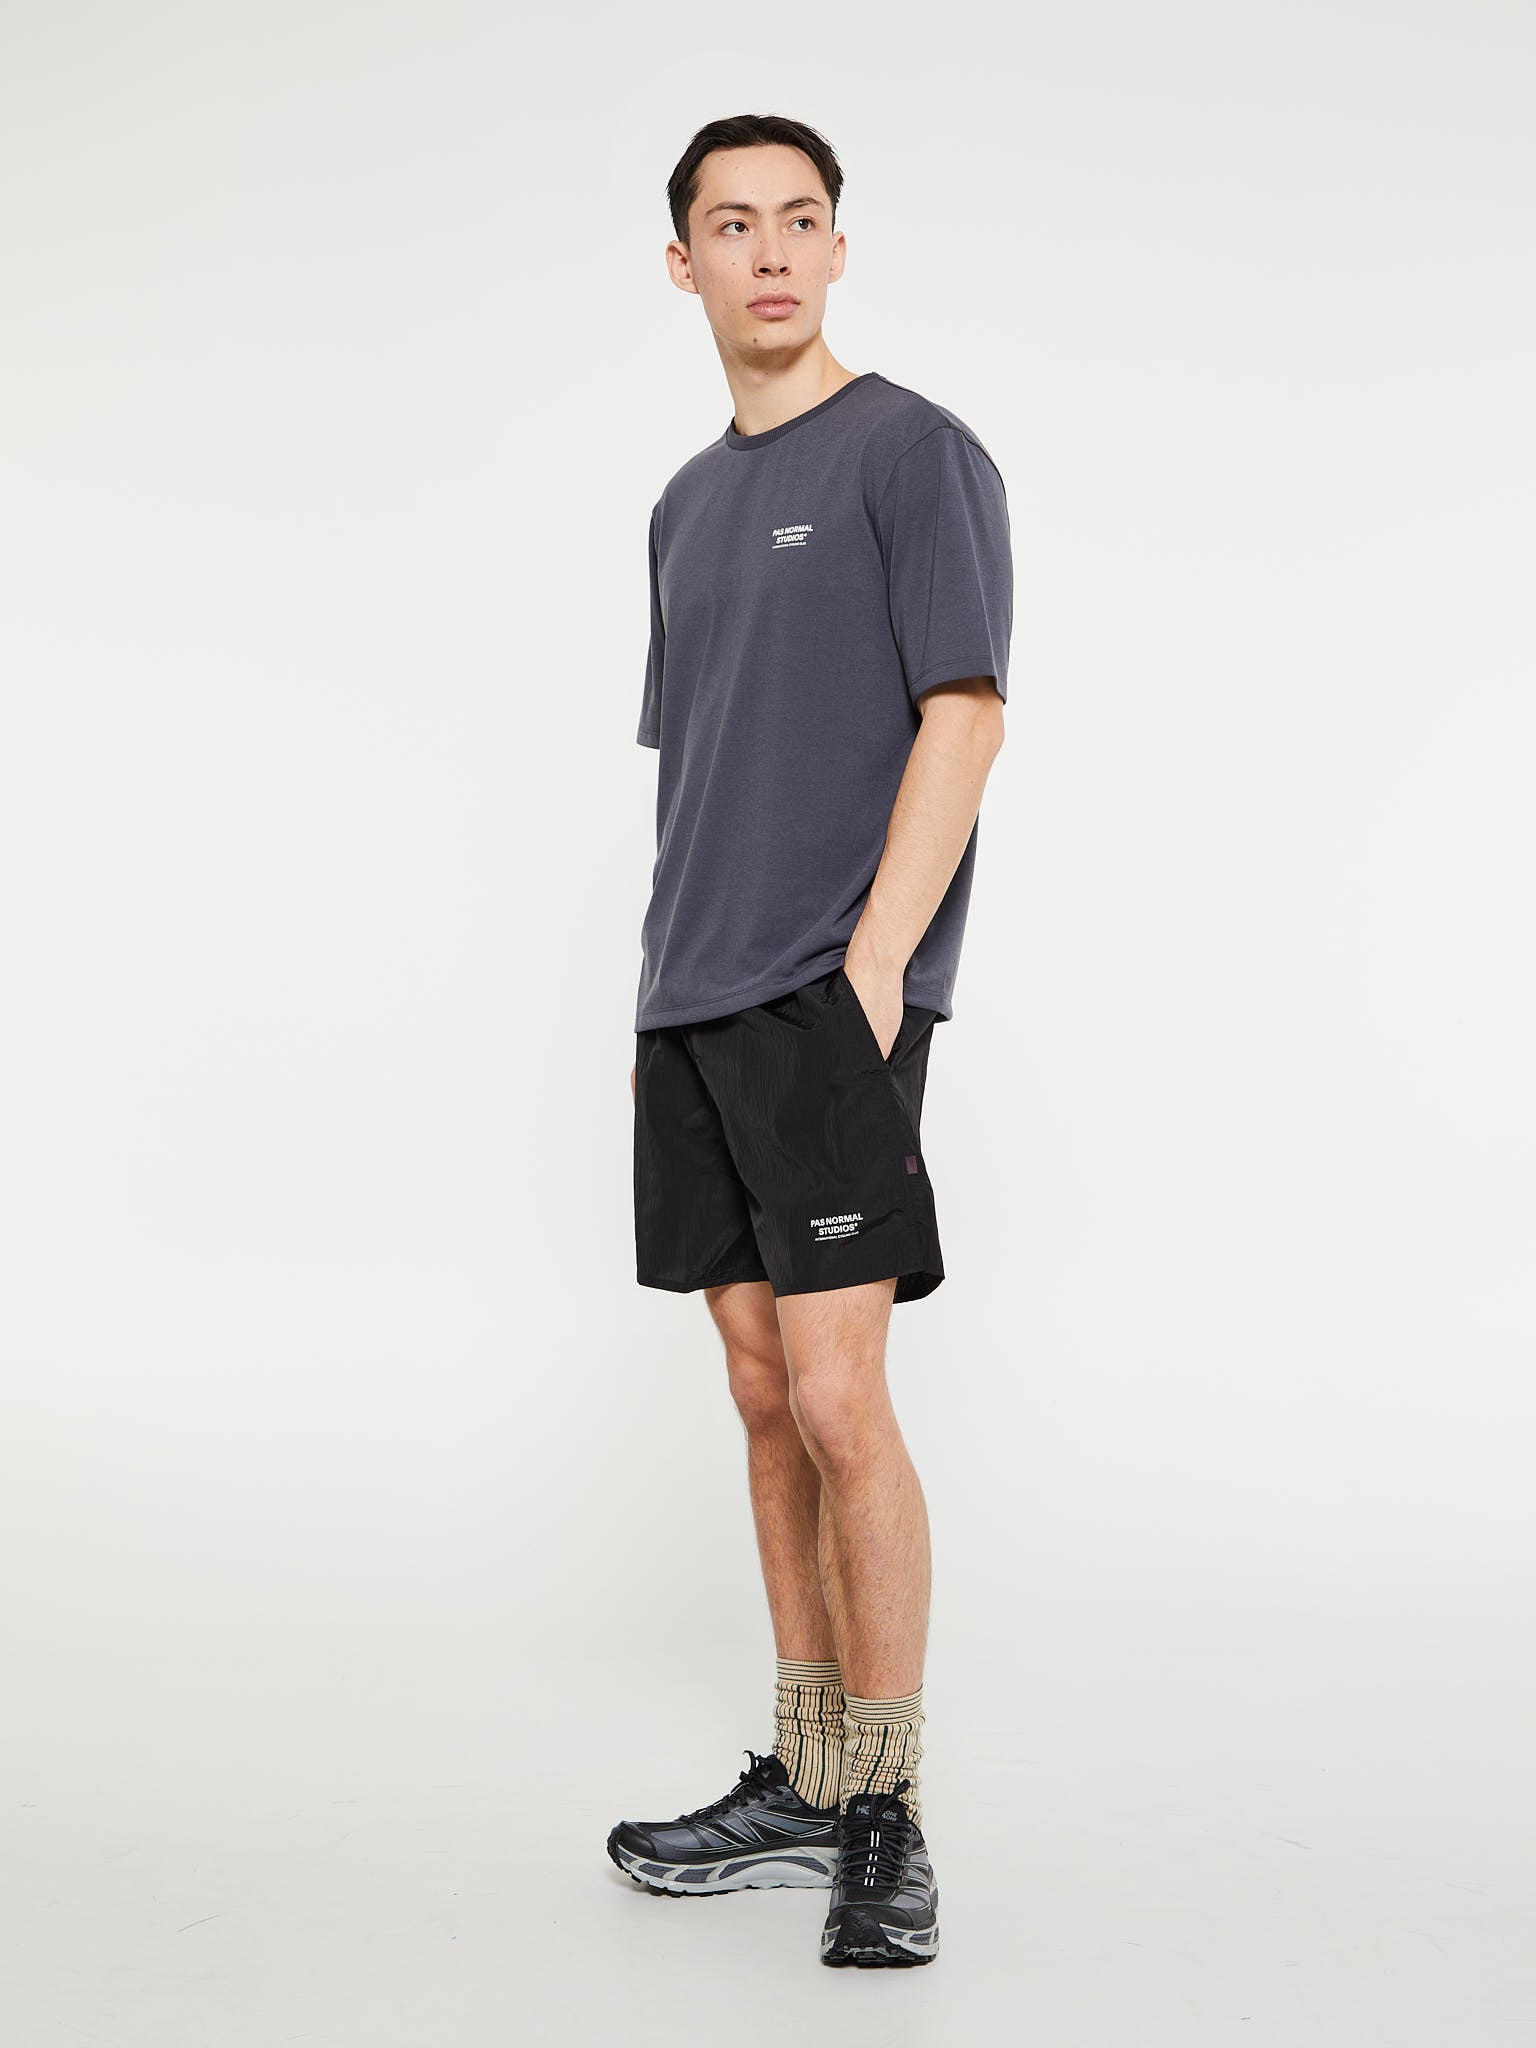 Off-Race Ripstop Shorts in Black